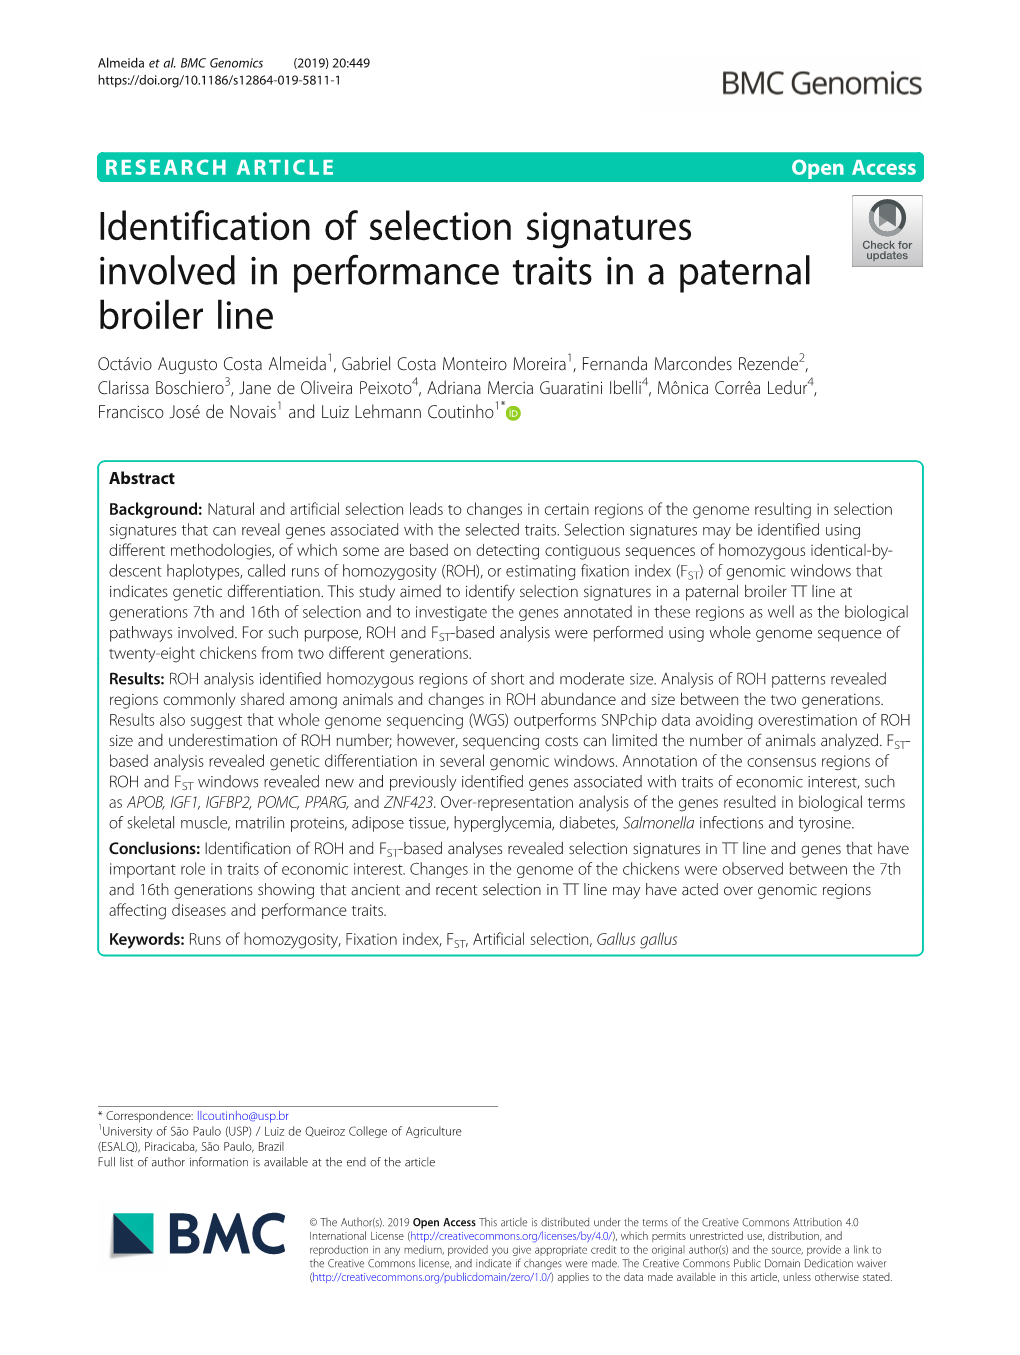 Identification of Selection Signatures Involved In